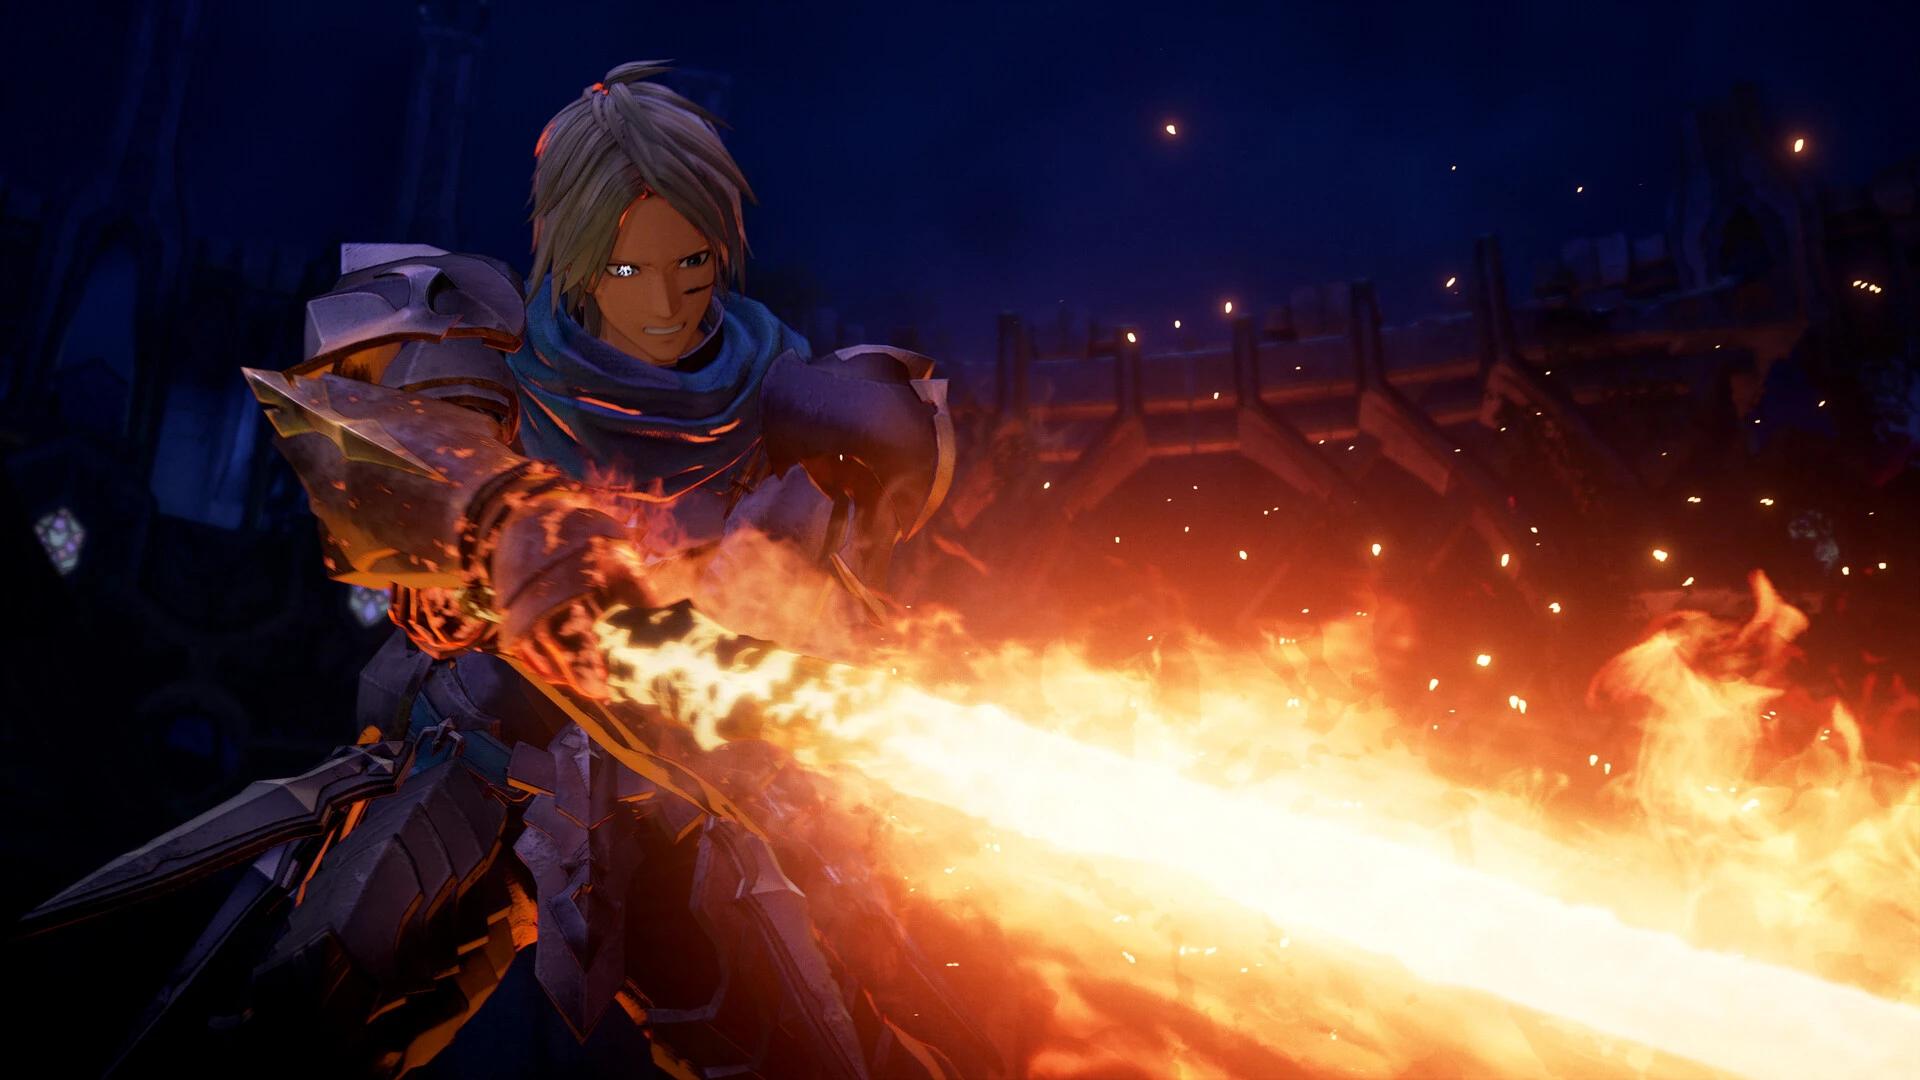 https://media.imgcdn.org/repo/2023/11/tales-of-arise-beyond-the-dawn-ultimate-edition/654daffce9ddf-tales-of-arise-beyond-the-dawn-expansion-screenshot2.webp